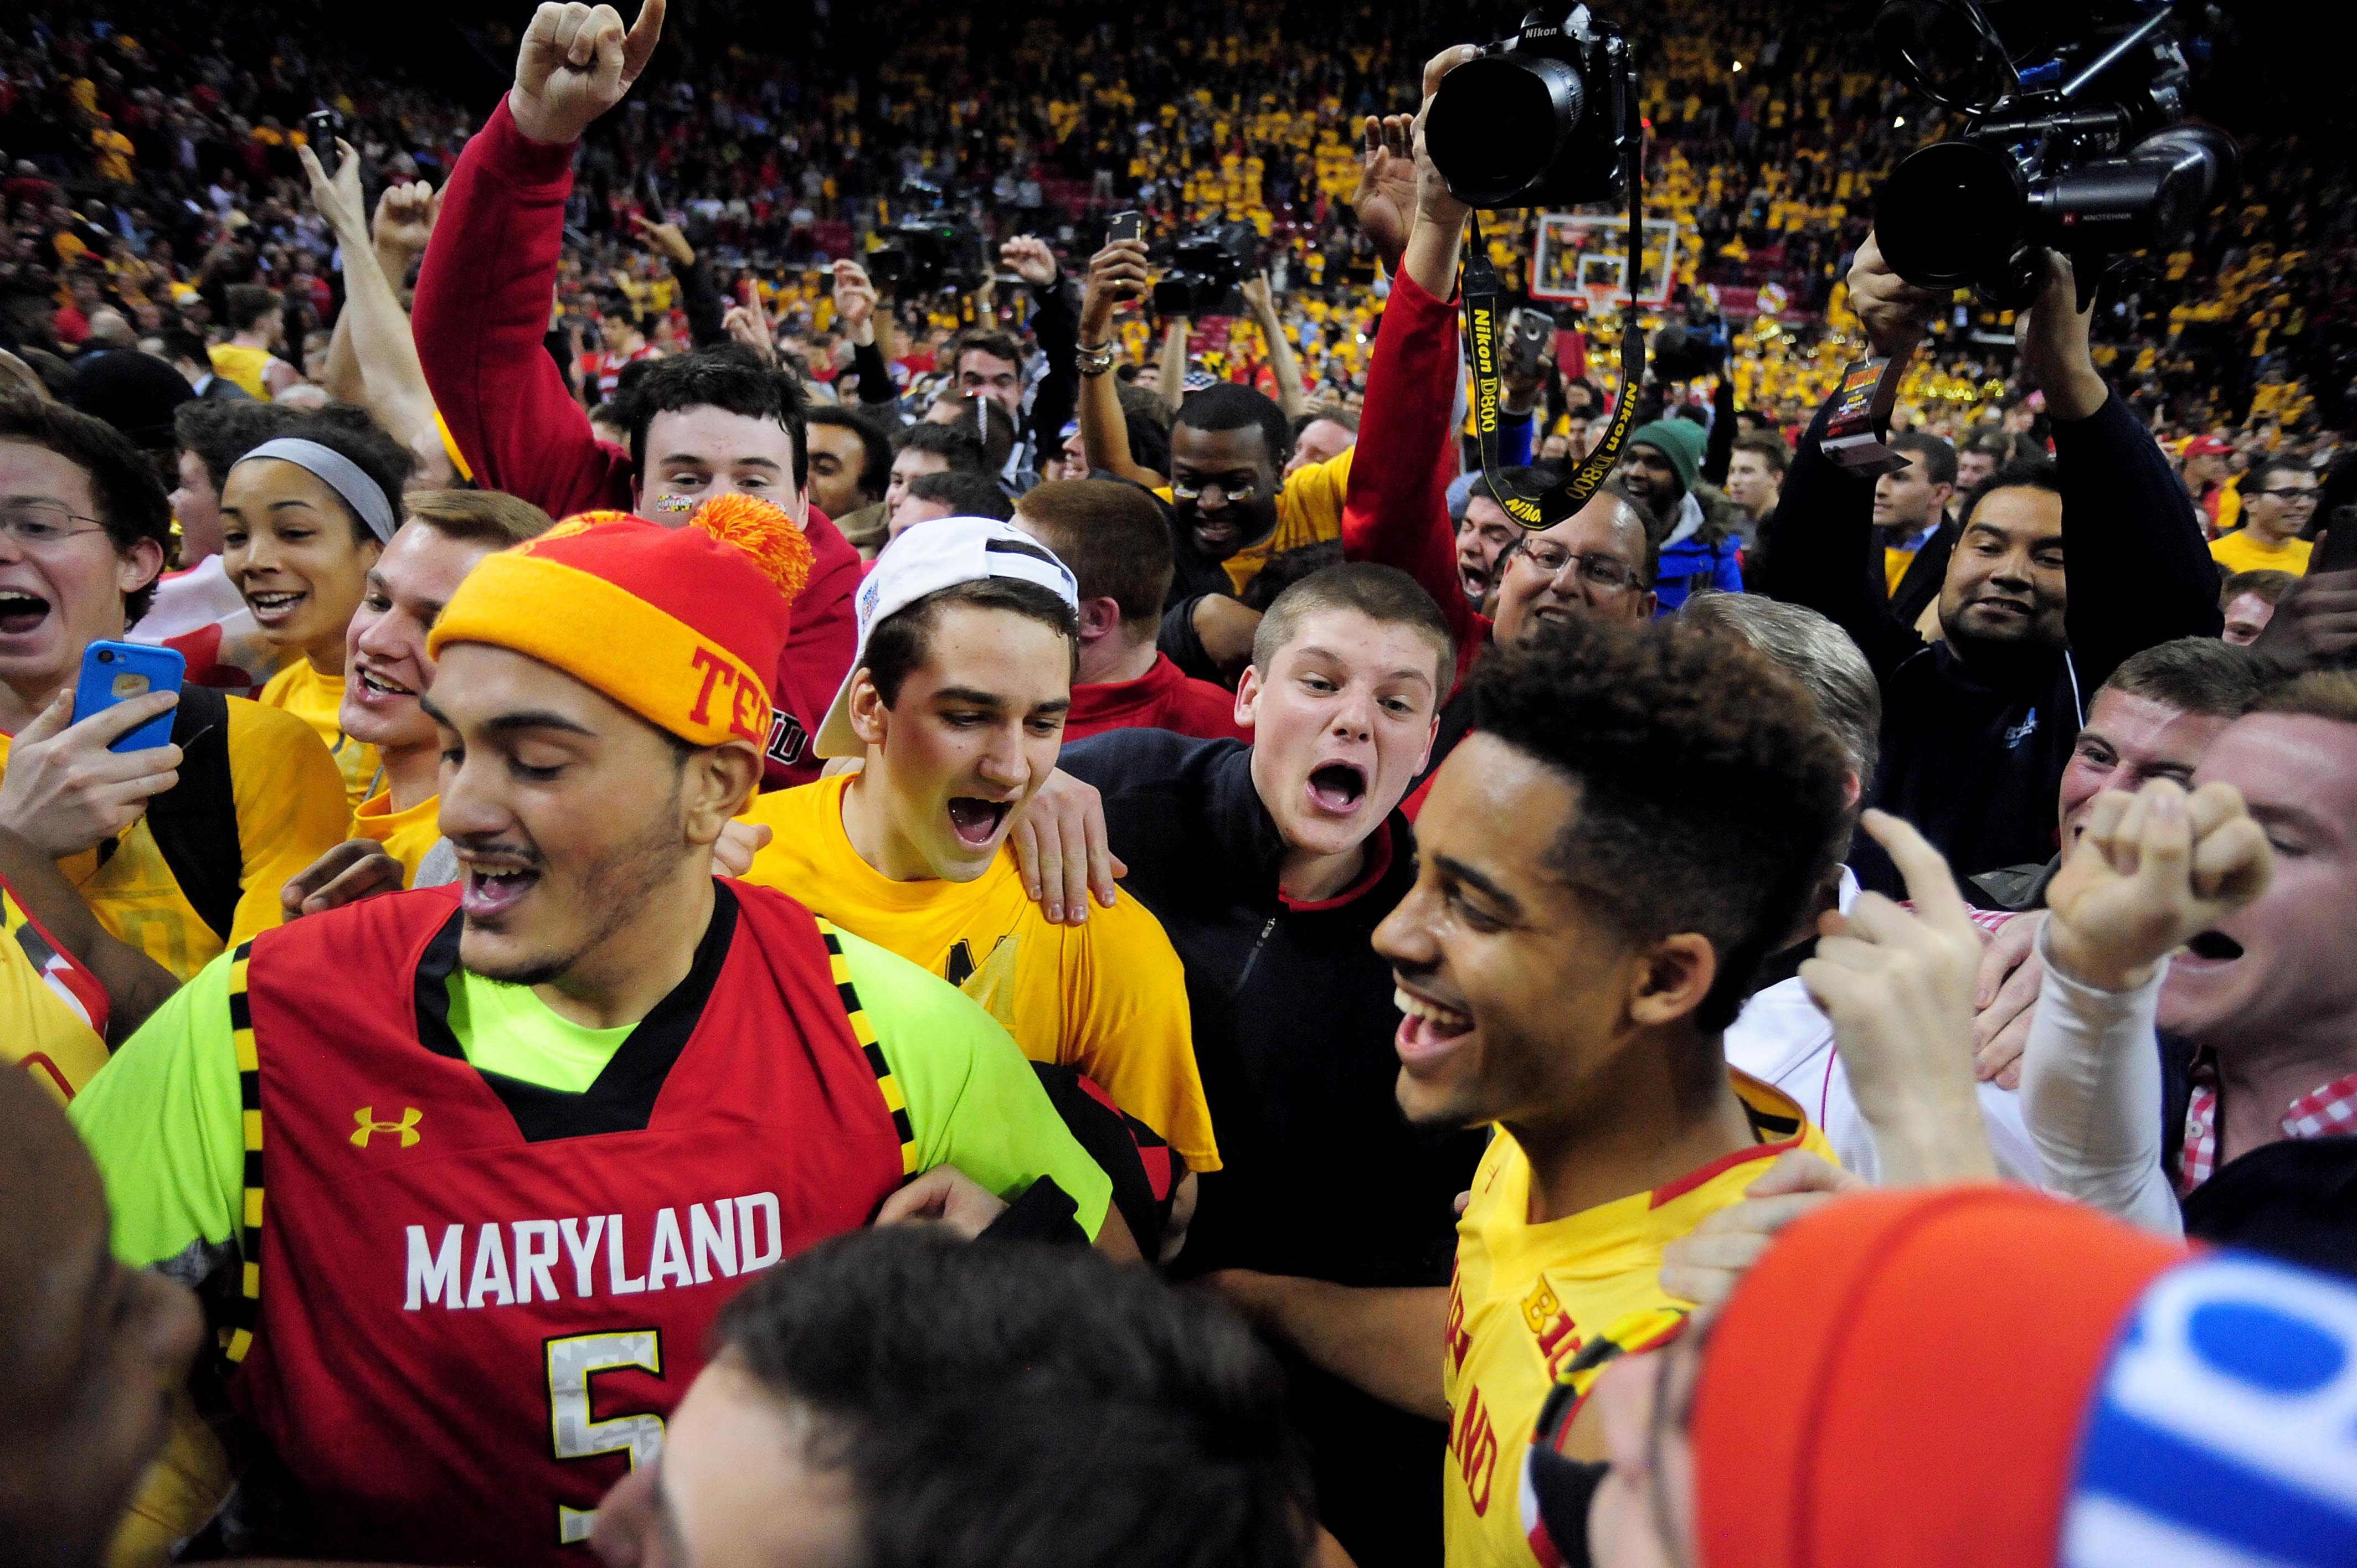 Maryland basketball fans rush court after win over Wisconsin.